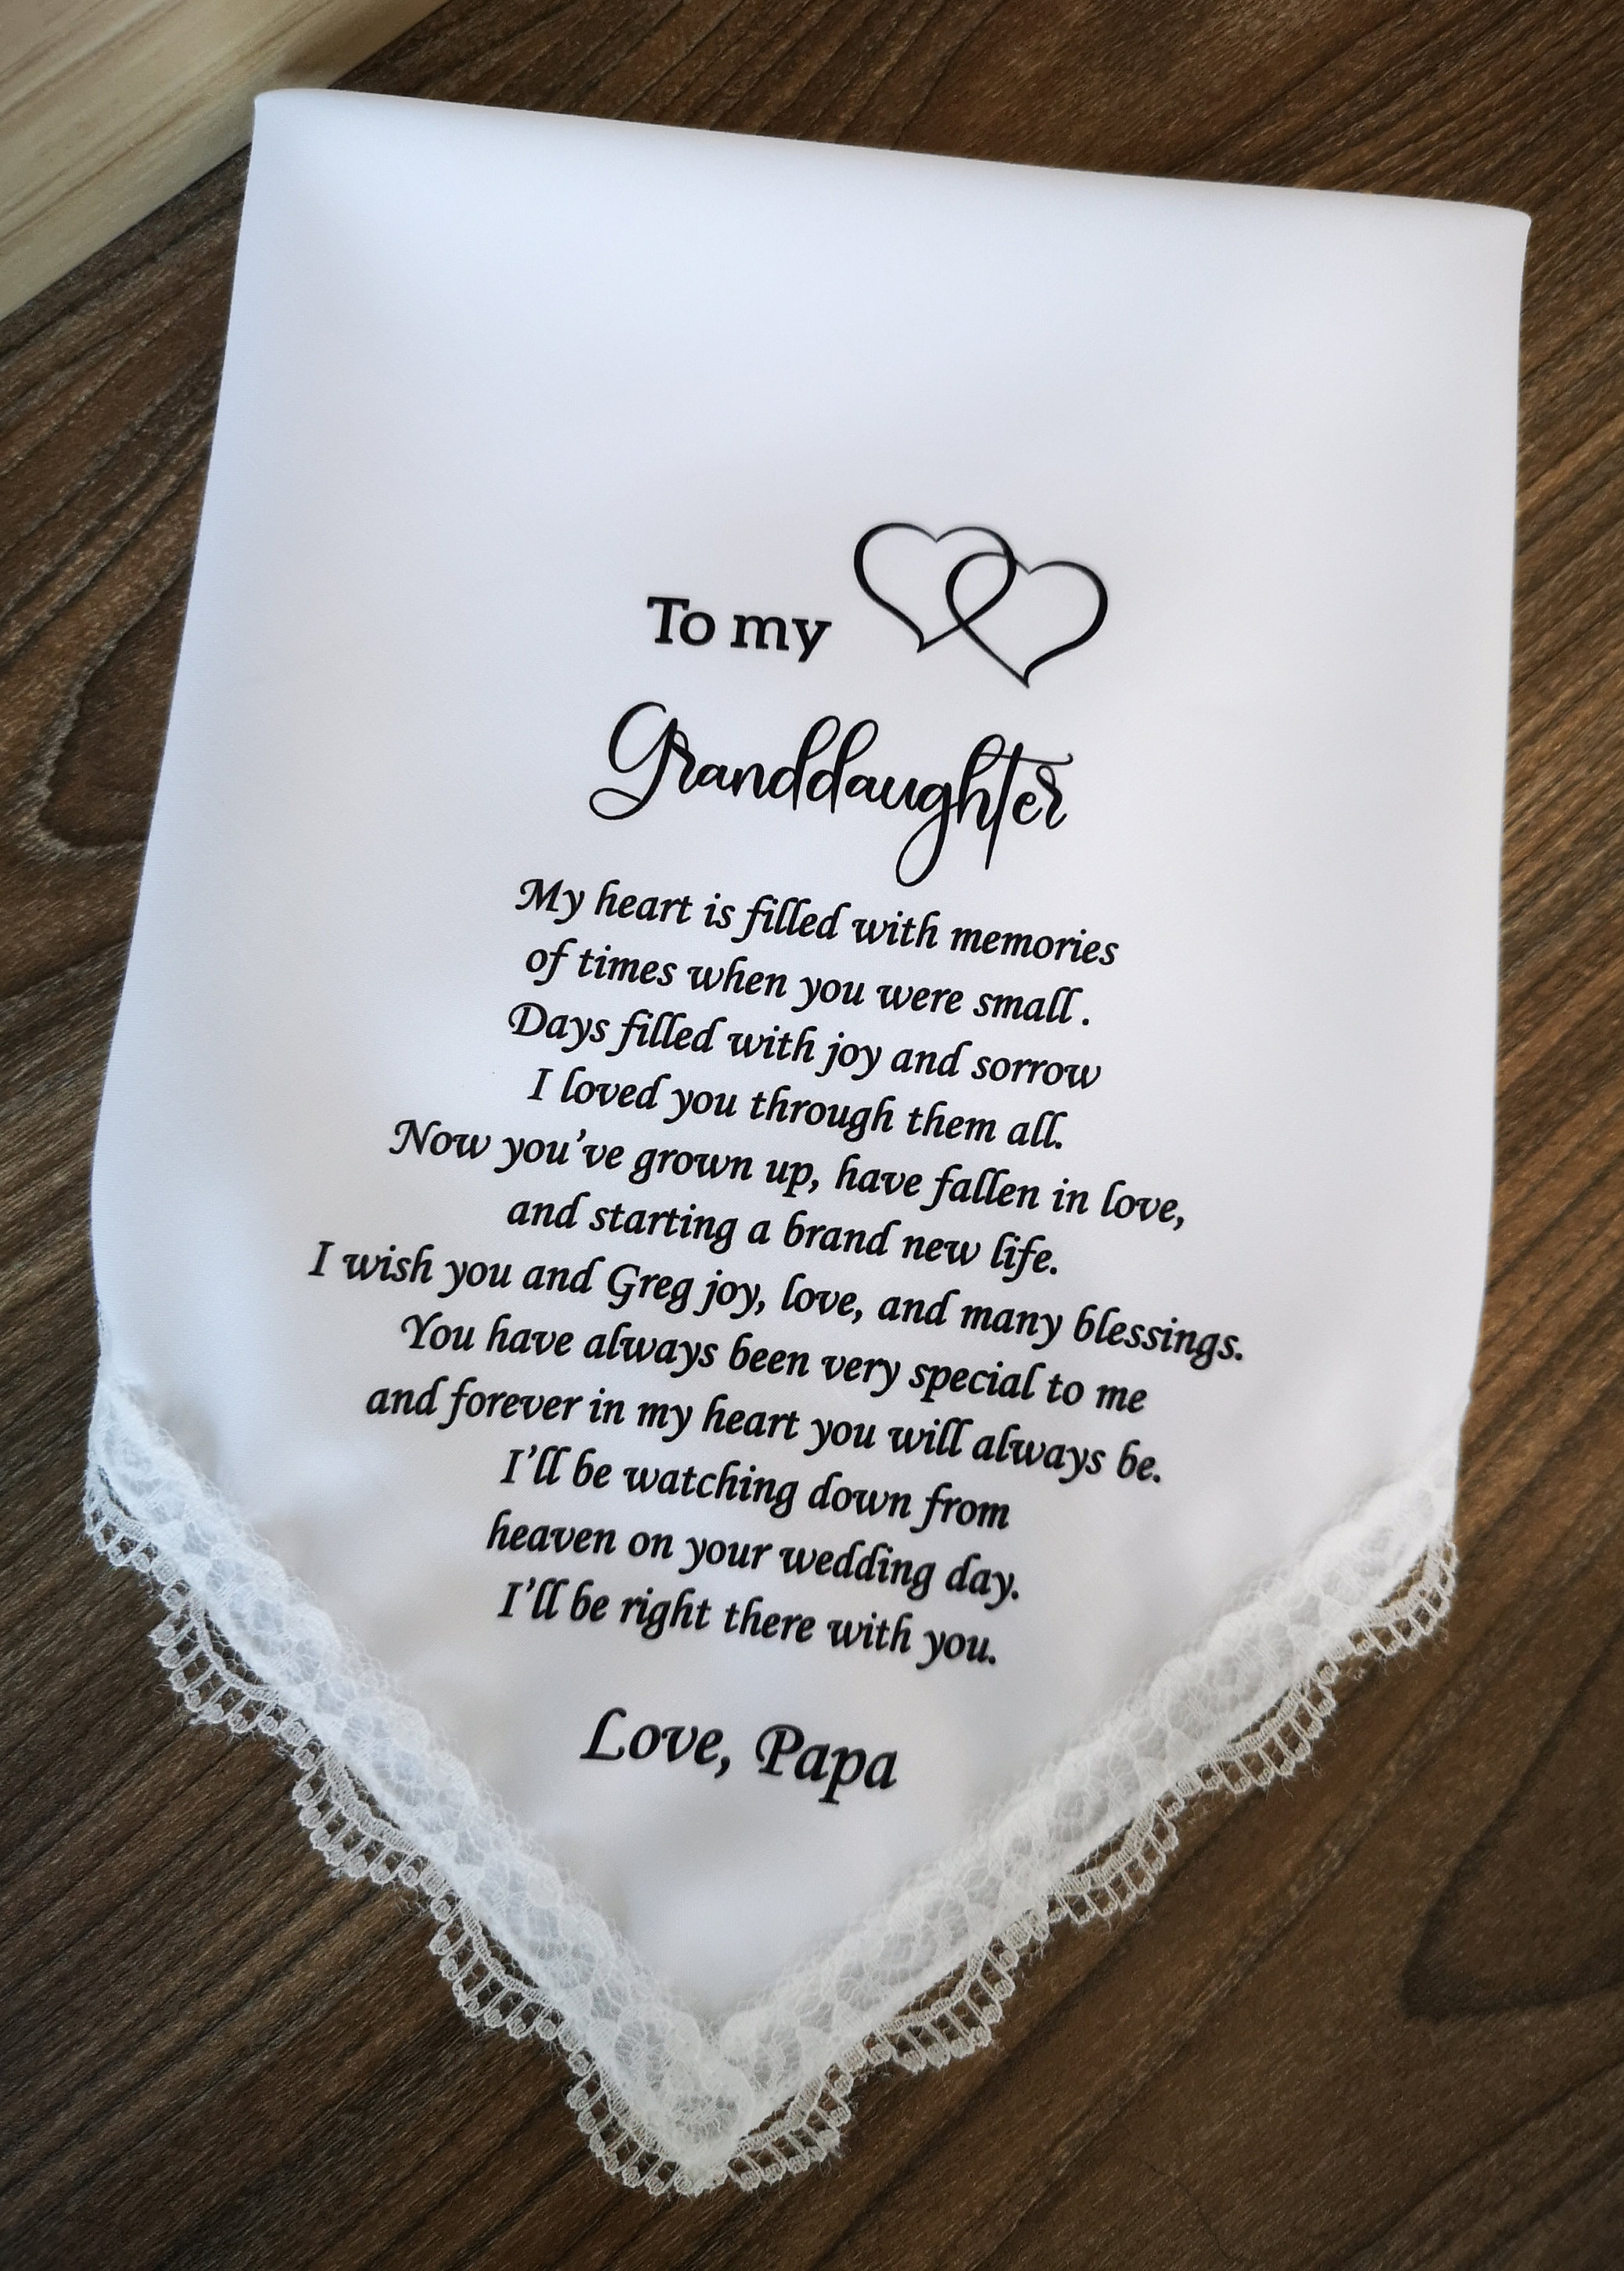 9 Grandfather of the Bride Handkerchief-Wedding Hankerchief-PRINT-CUSTOMIZE-Wedding gift to Grandpa-Grandfather hankie from the Bride-MS1FCAC by Snugahug